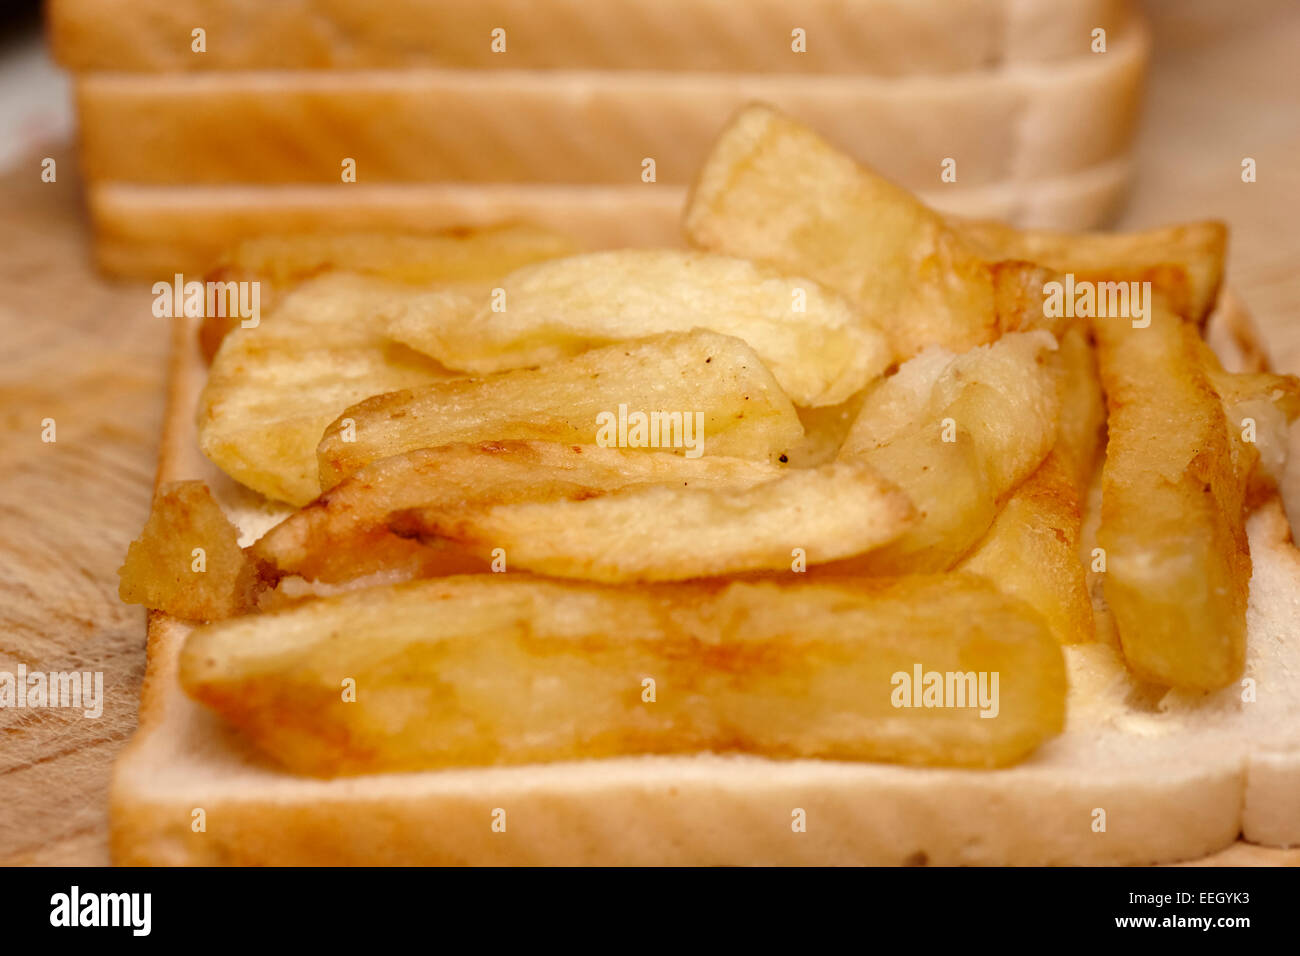 chip butty on buttered white bread Stock Photo